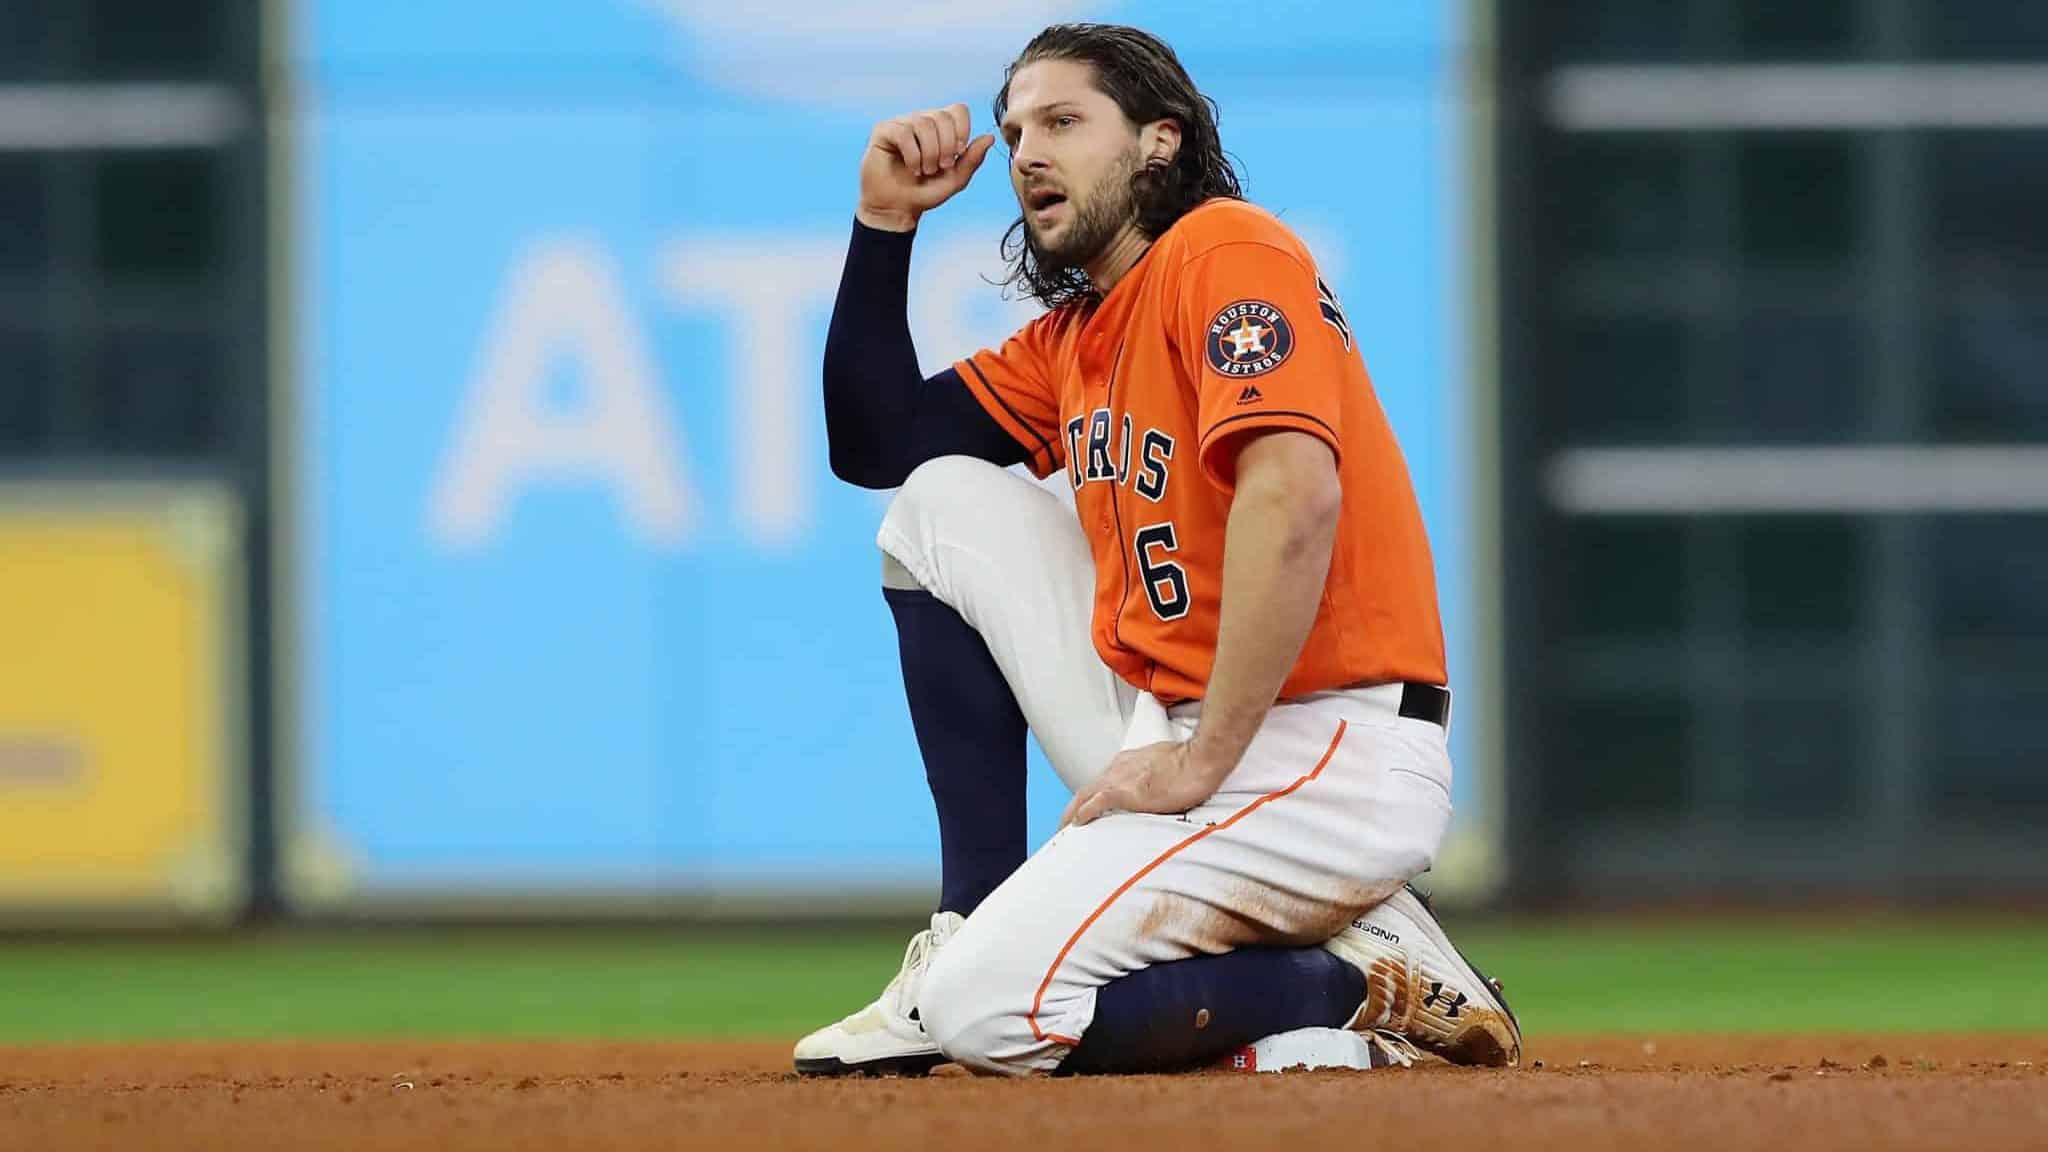 HOUSTON, TEXAS - OCTOBER 30: Jake Marisnick #6 of the Houston Astros reacts after being thrown out in a double play against the Washington Nationals during the sixth inning in Game Seven of the 2019 World Series at Minute Maid Park on October 30, 2019 in Houston, Texas.